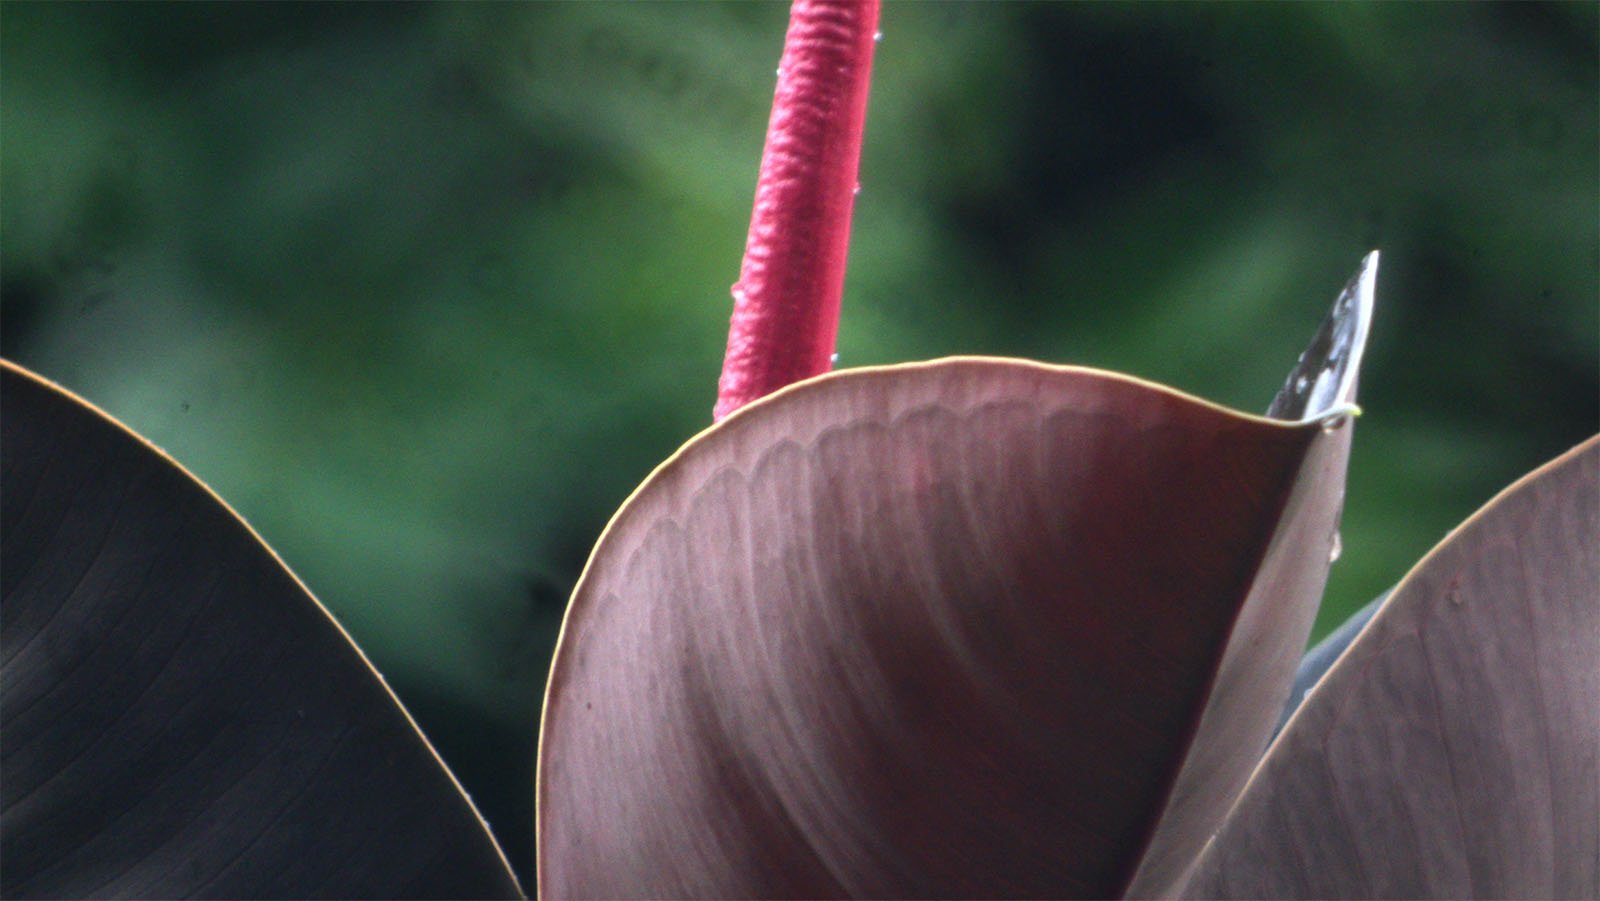 Close-up of a plant with glossy, bronze-colored leaves and a bright pink stem, with a single water droplet on one leaf against a blurred green background.